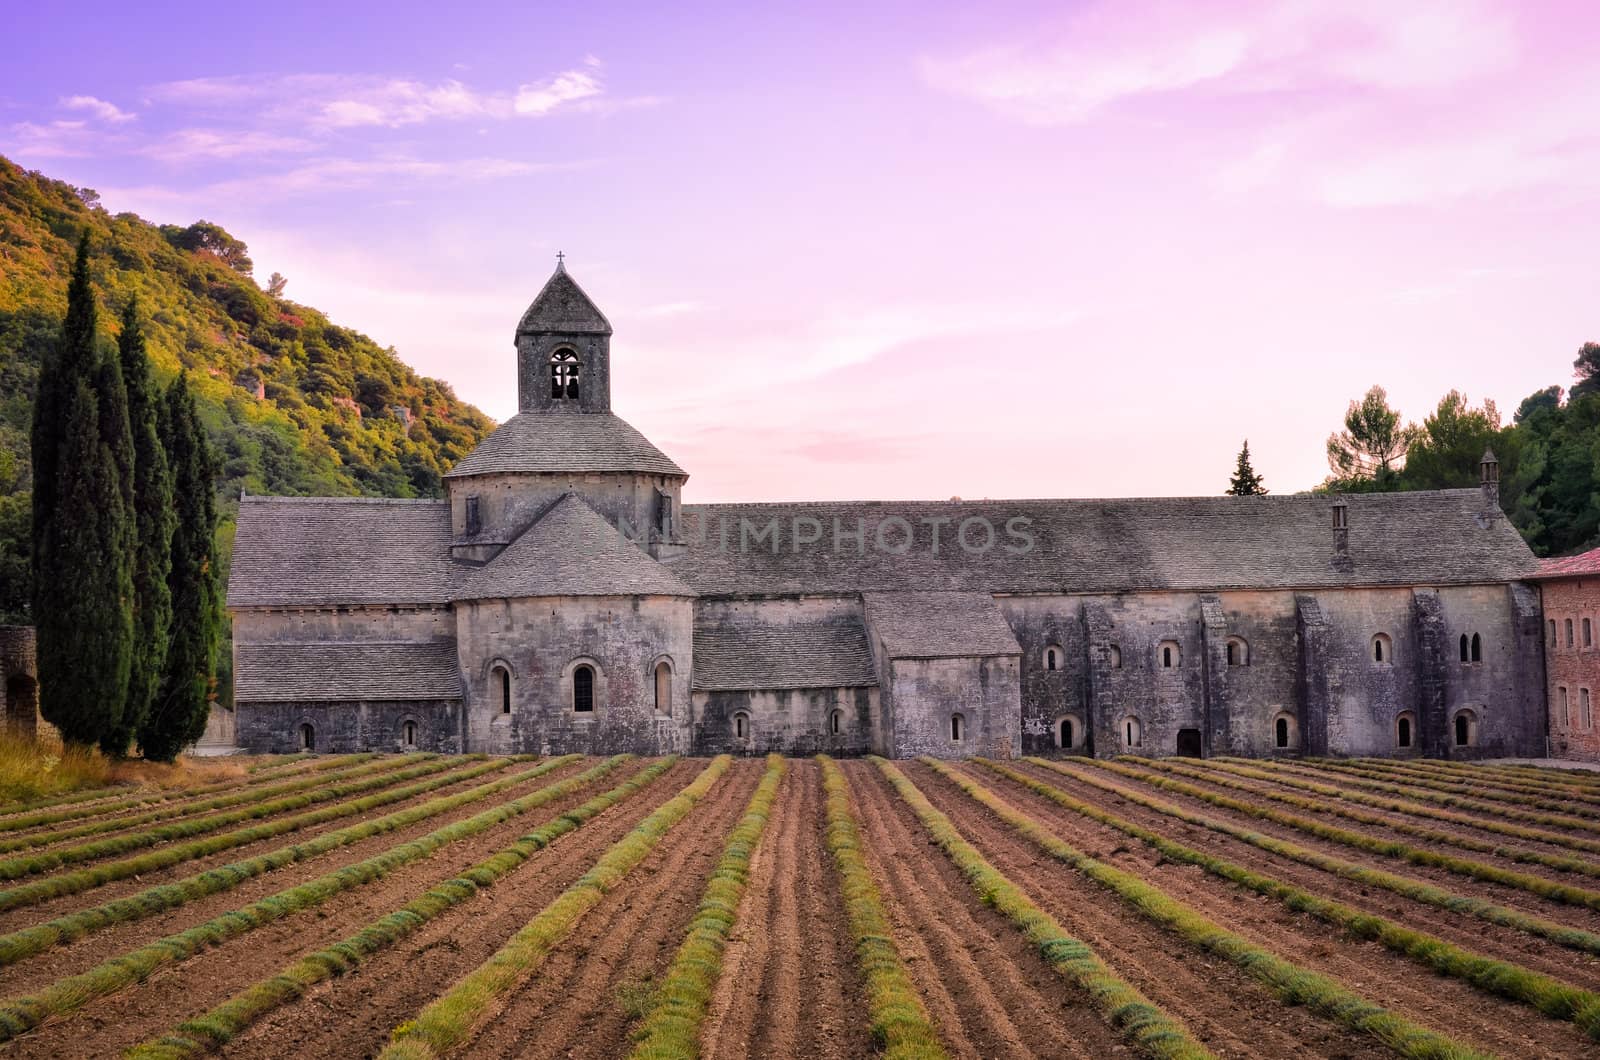 Abbaye de Senanque in Provence before sunset, France